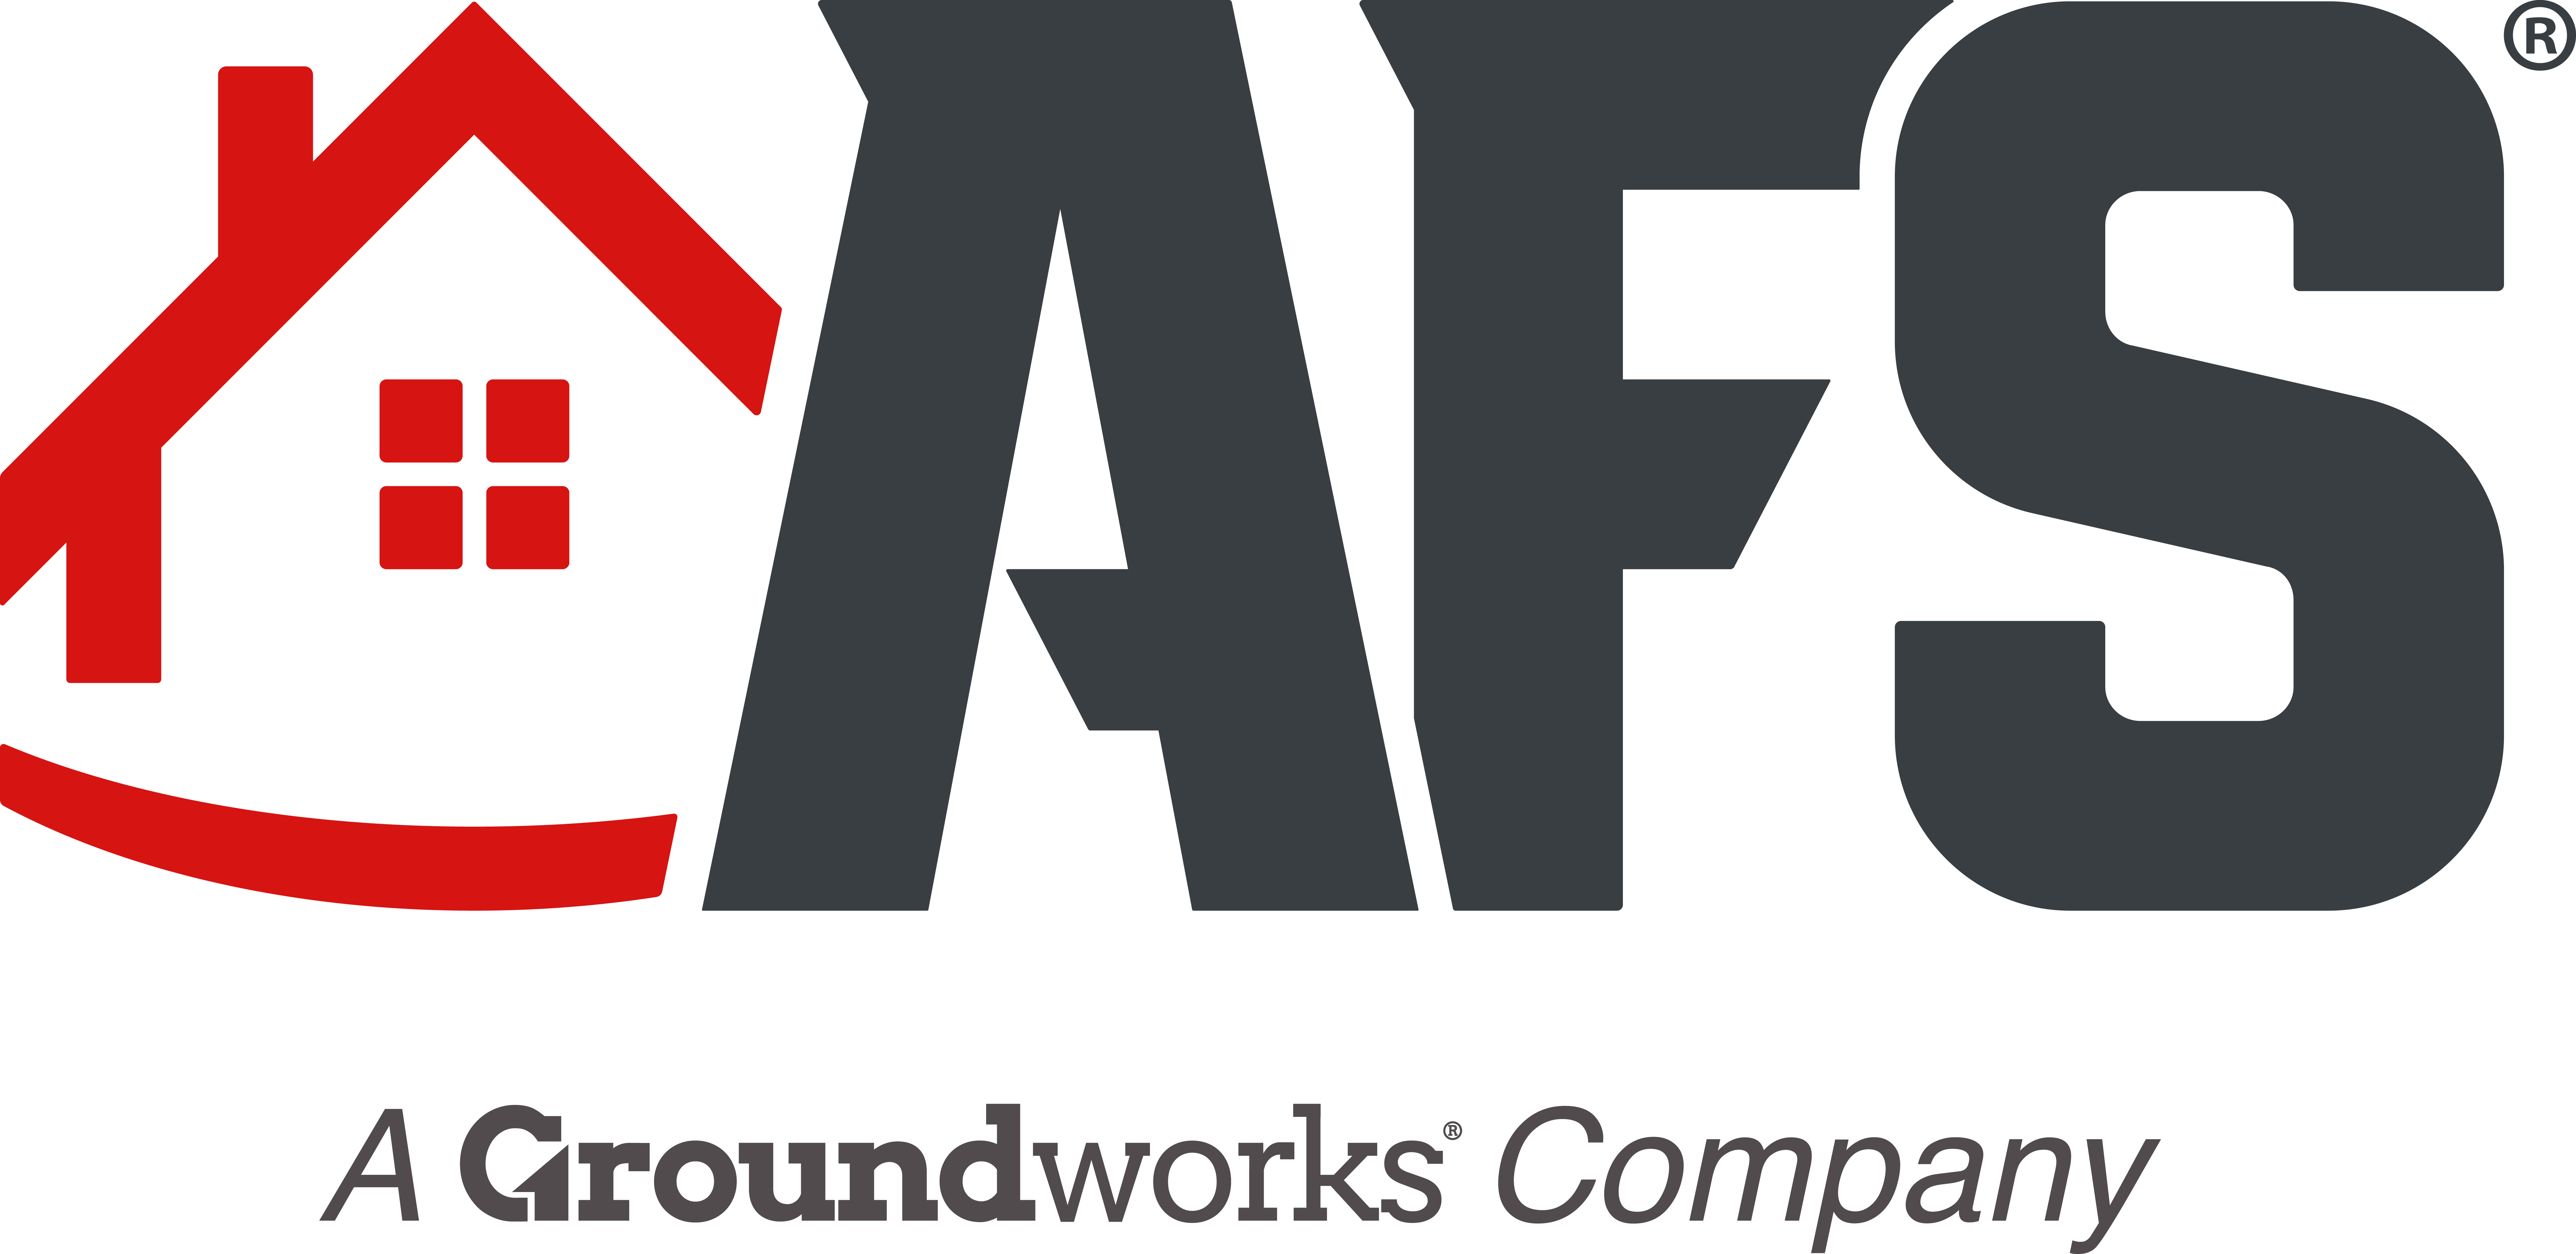 Foundation Recovery Systems Logo